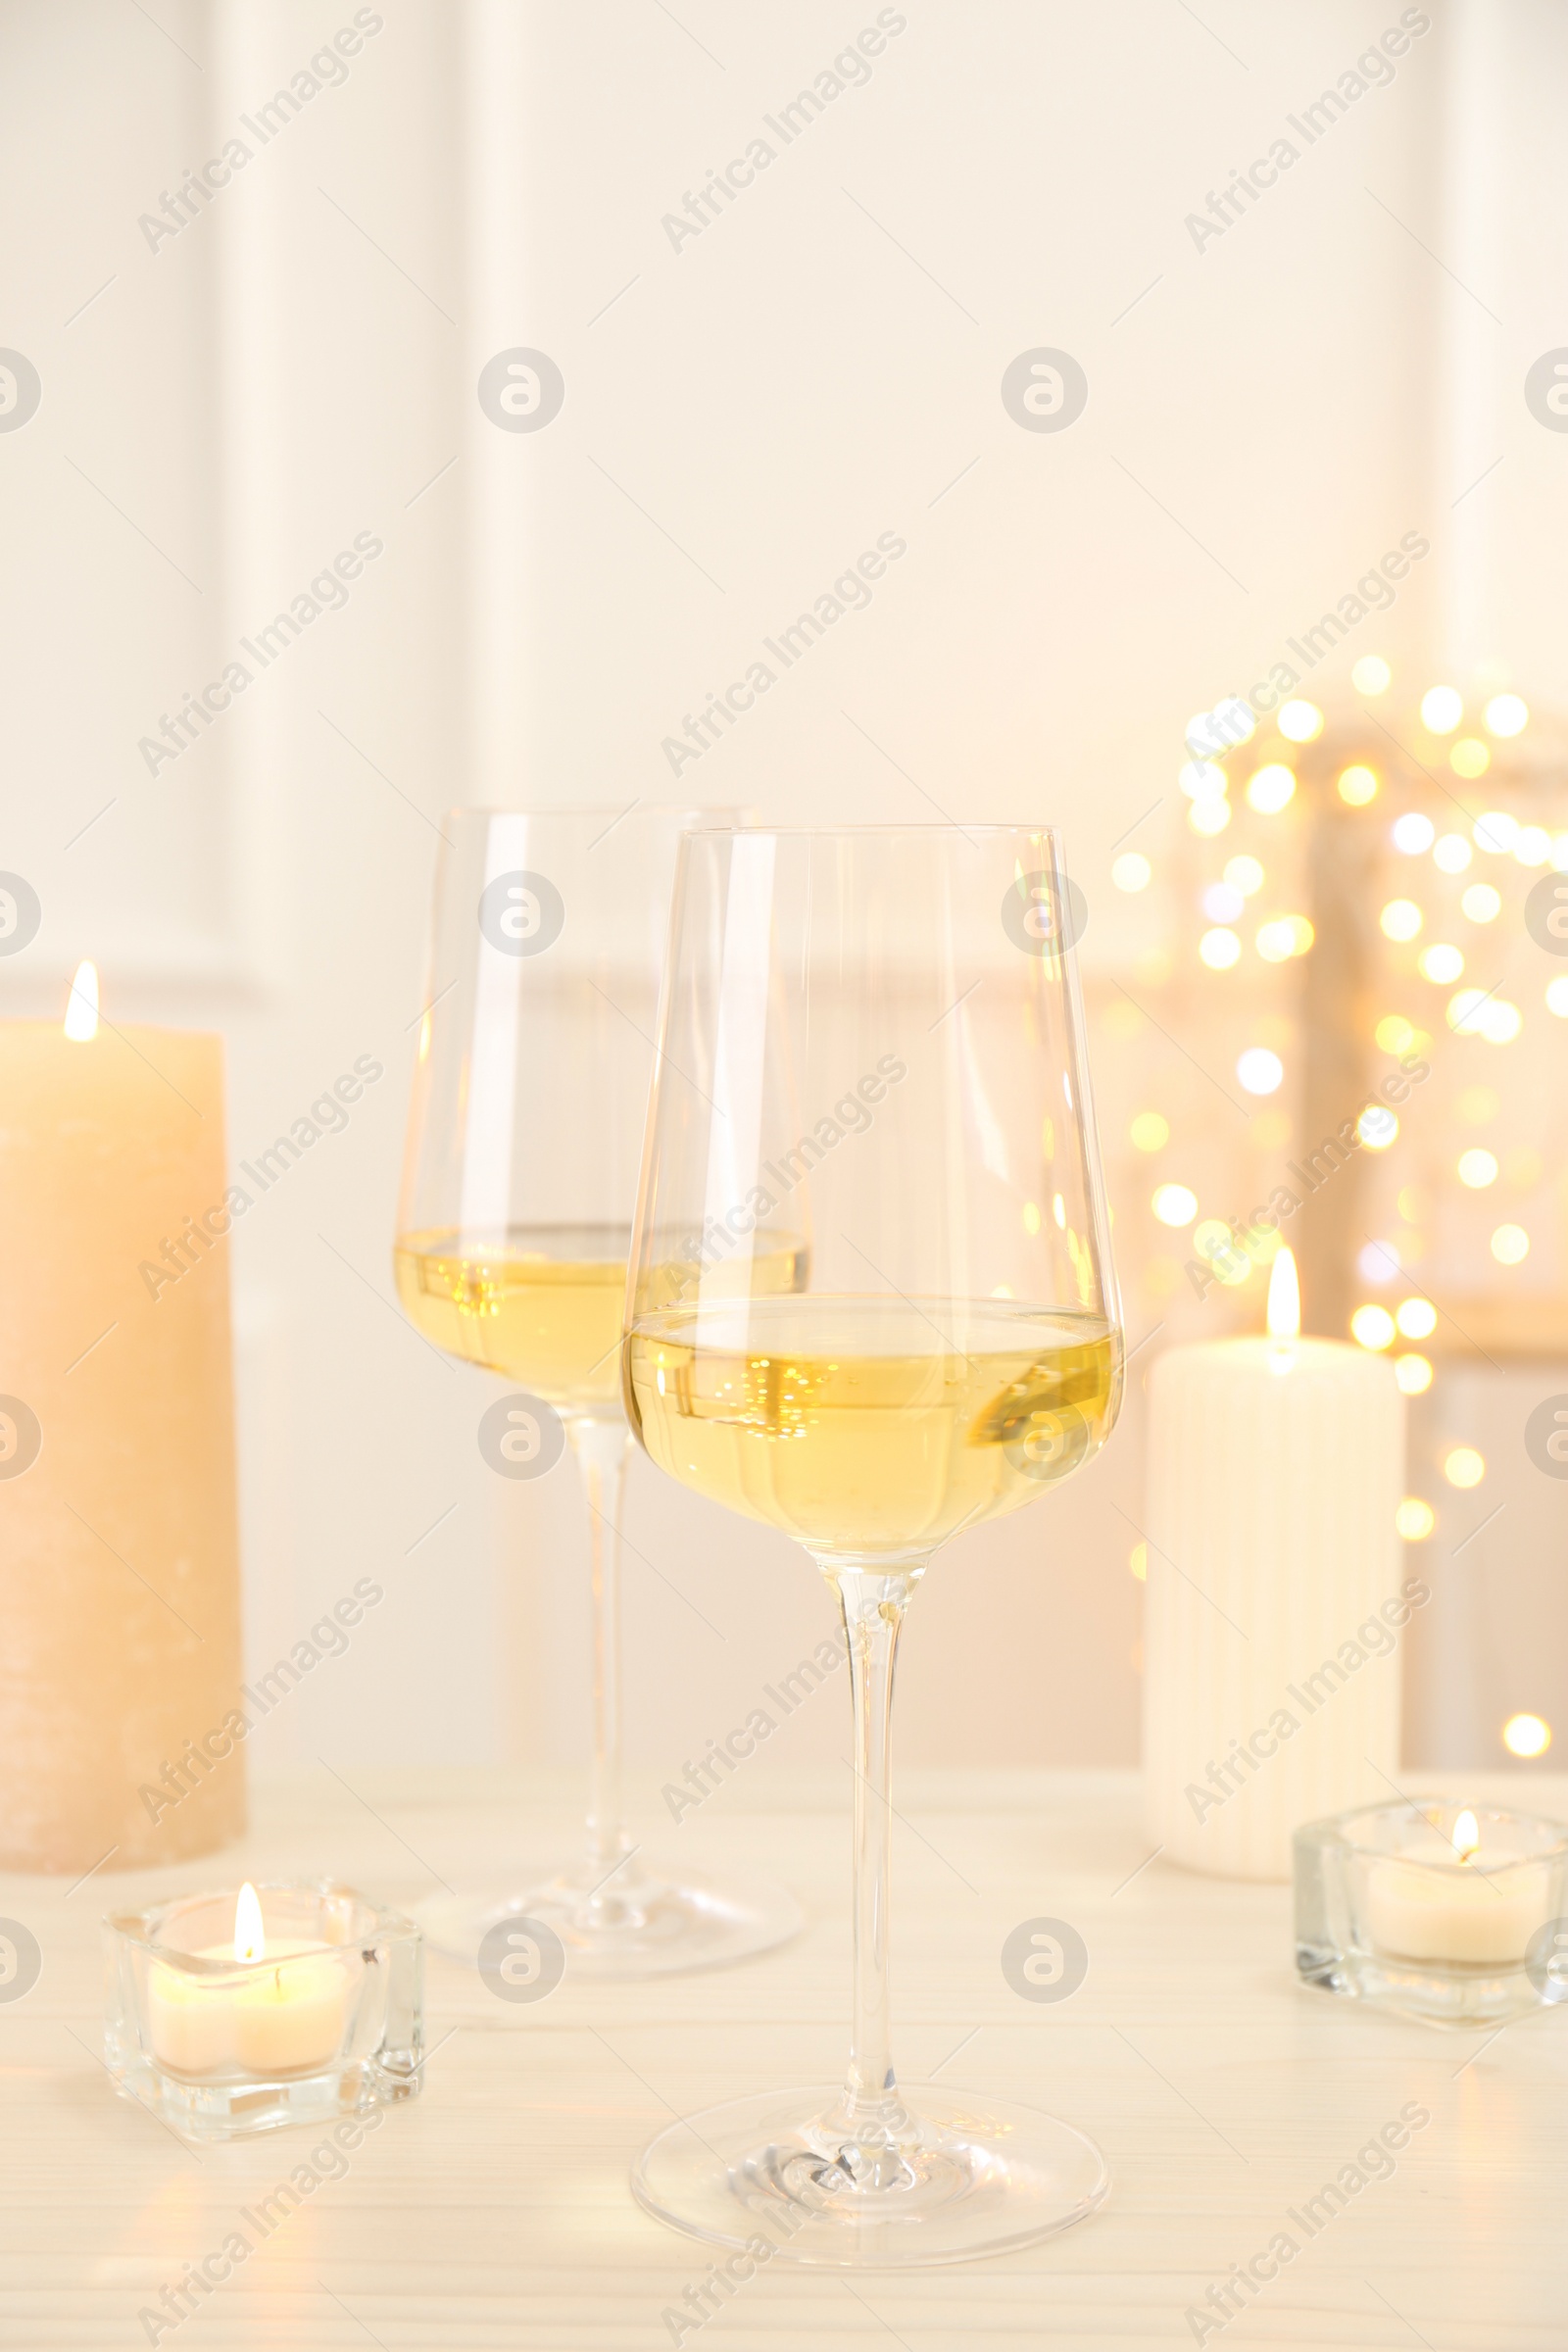 Photo of Glasses of wine and candles on wooden table